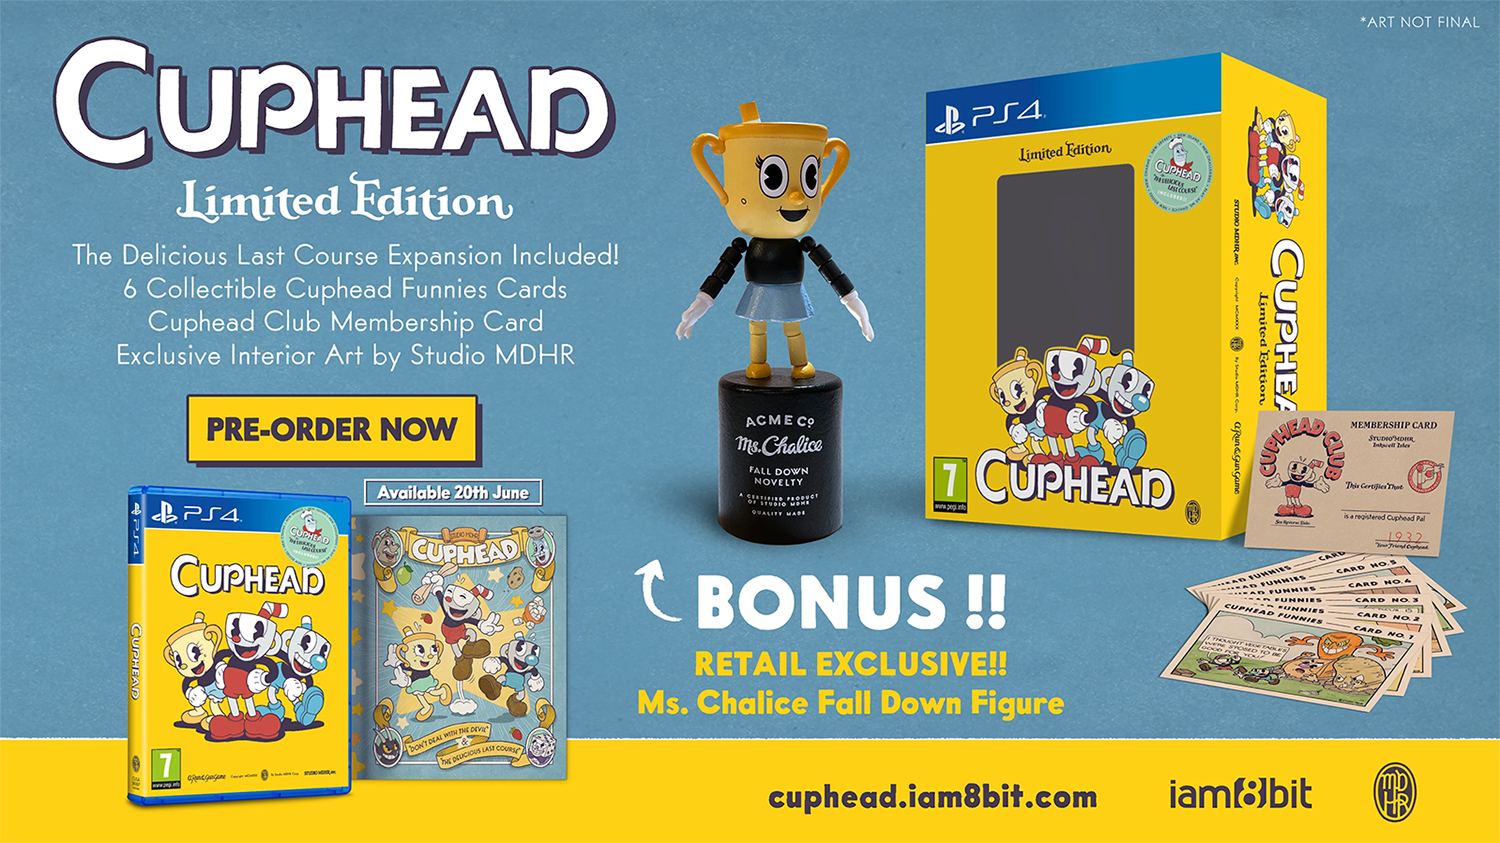 Cuphead [Limited Edition] for PlayStation 4